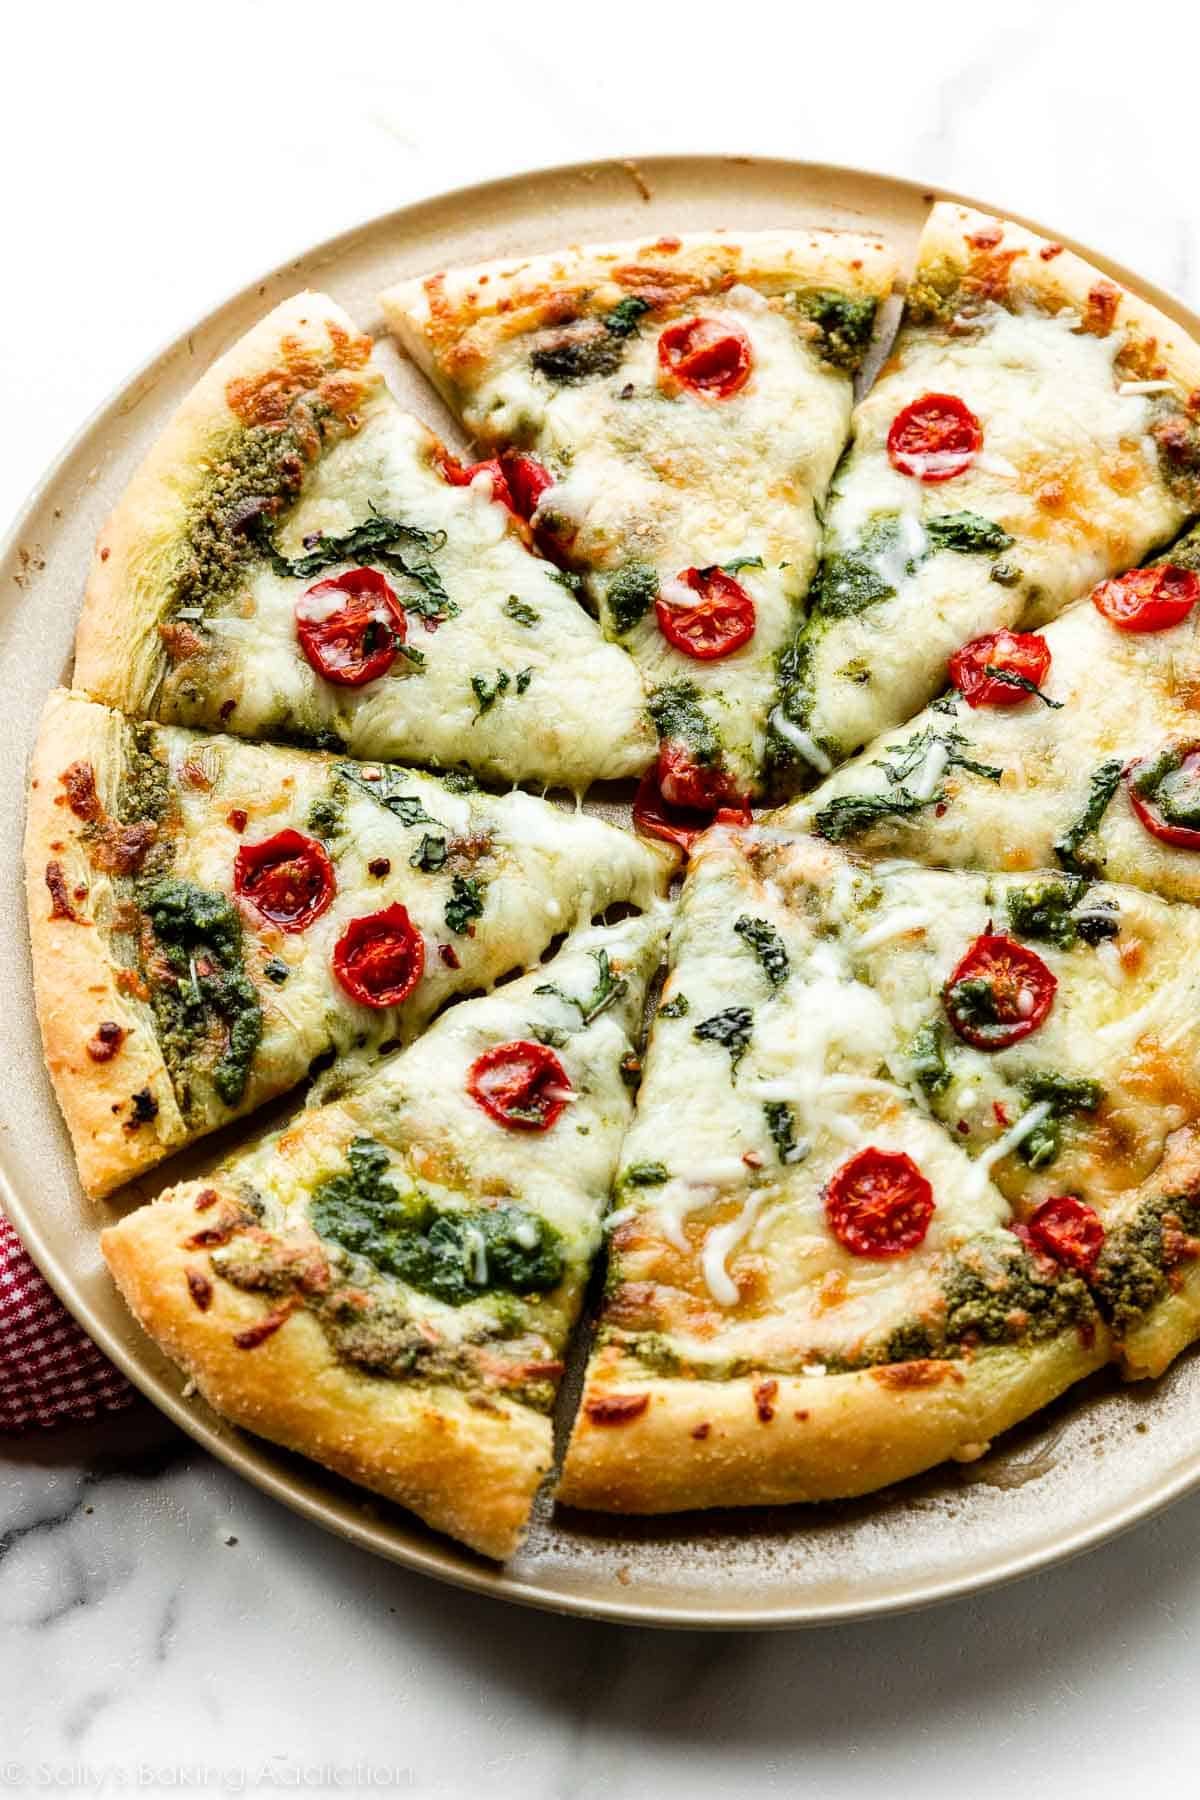 baked and sliced pesto pizza with mozzarella cheese and tomatoes.